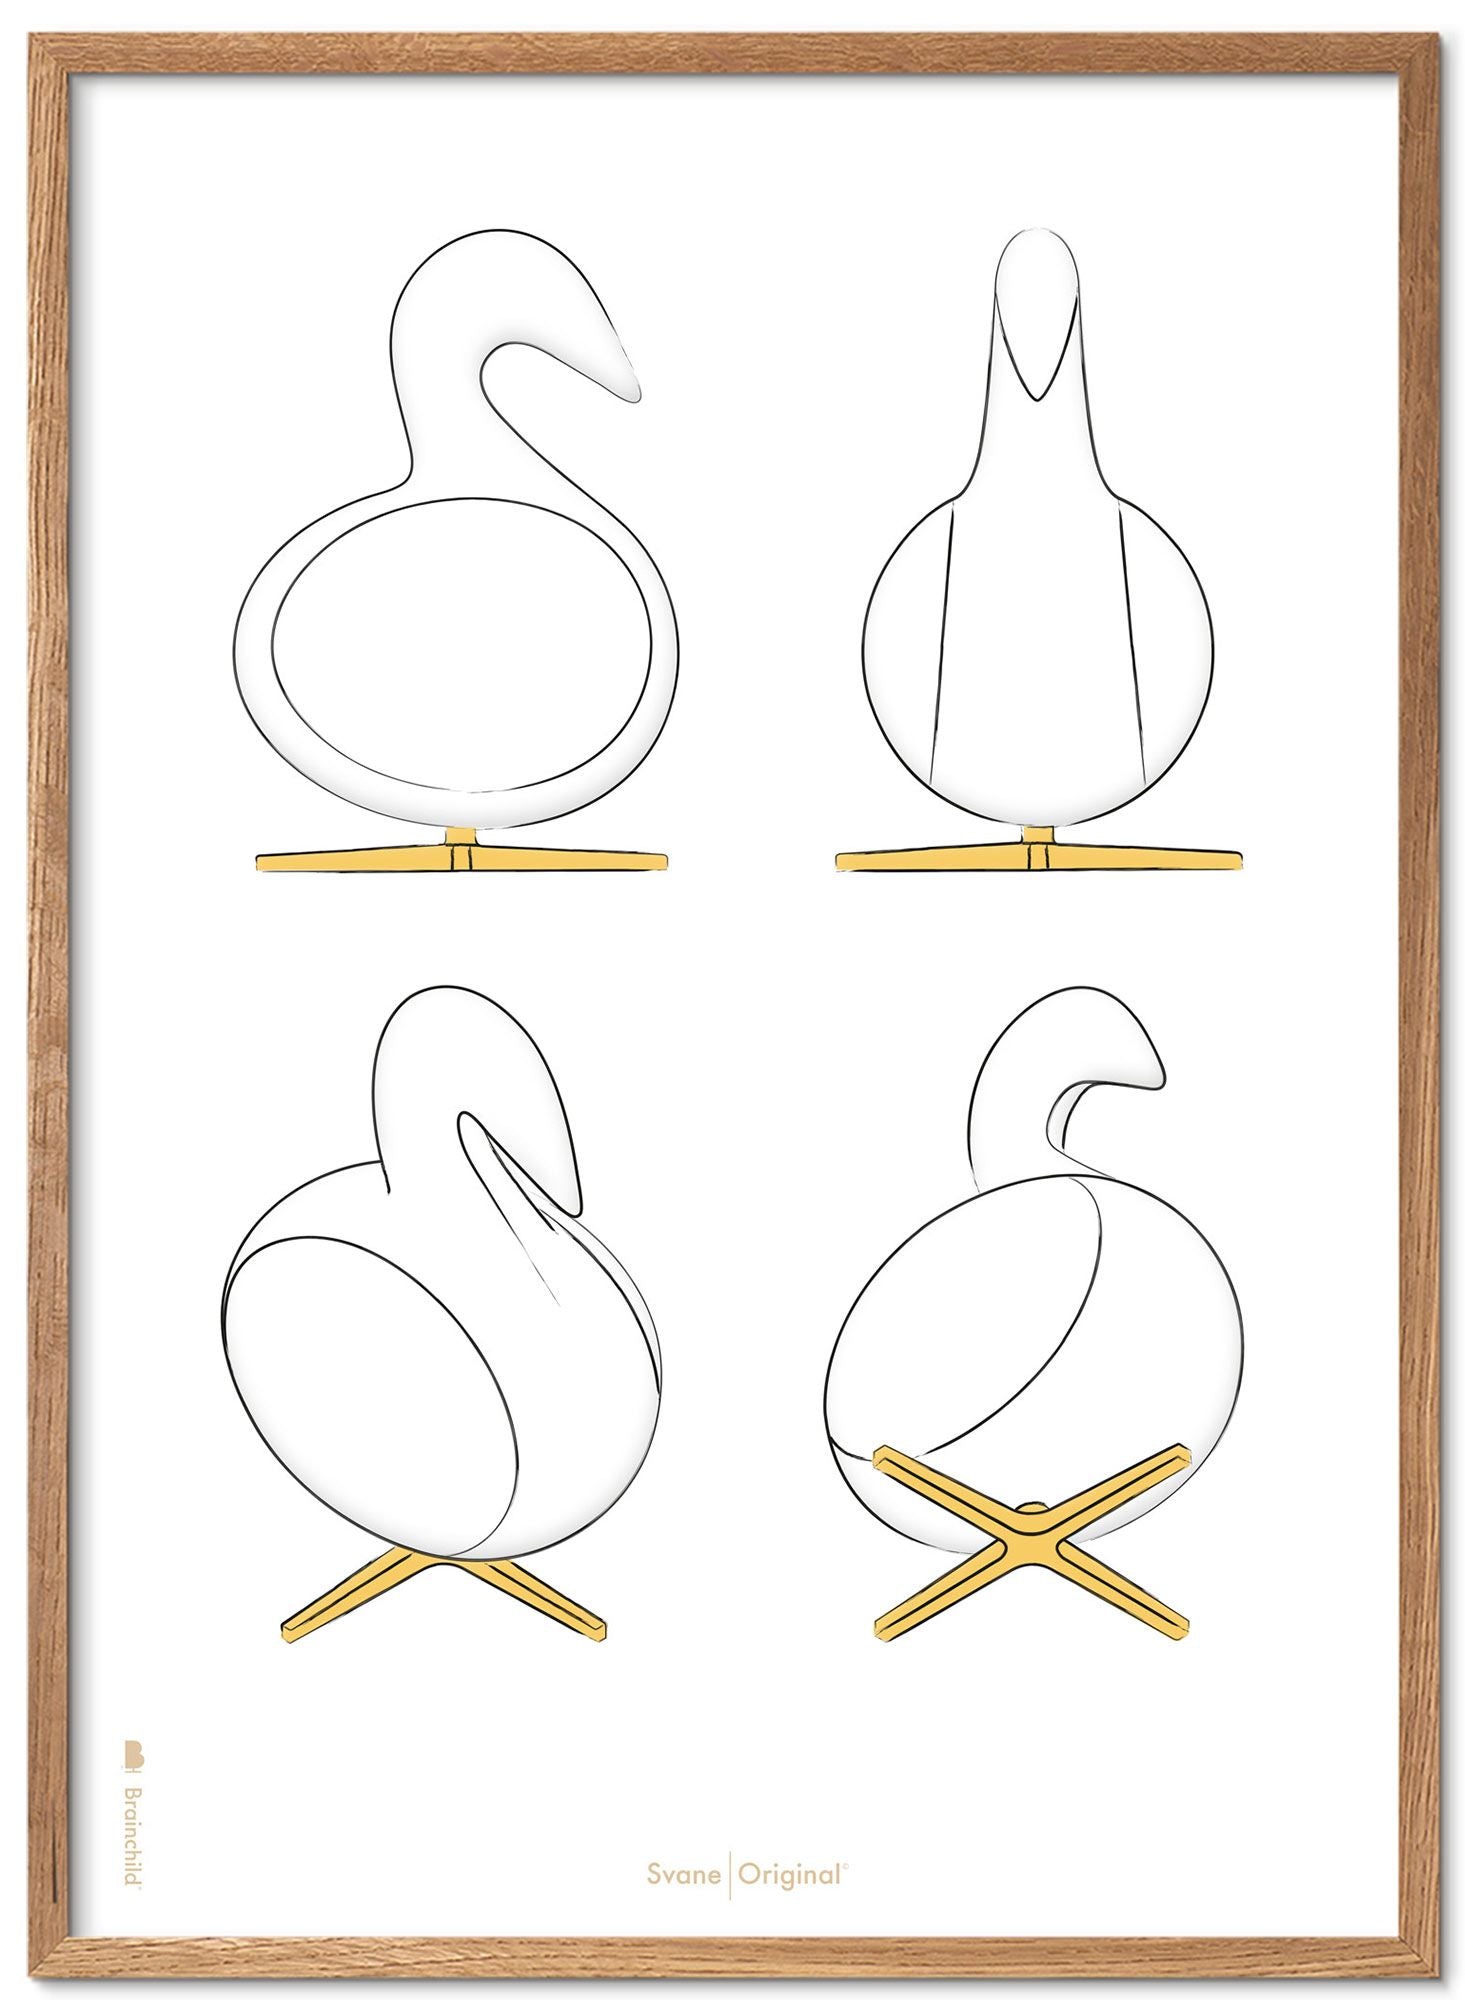 Brainchild Swan Design Sketches Poster Frame Made Of Light Wood A5, White Background